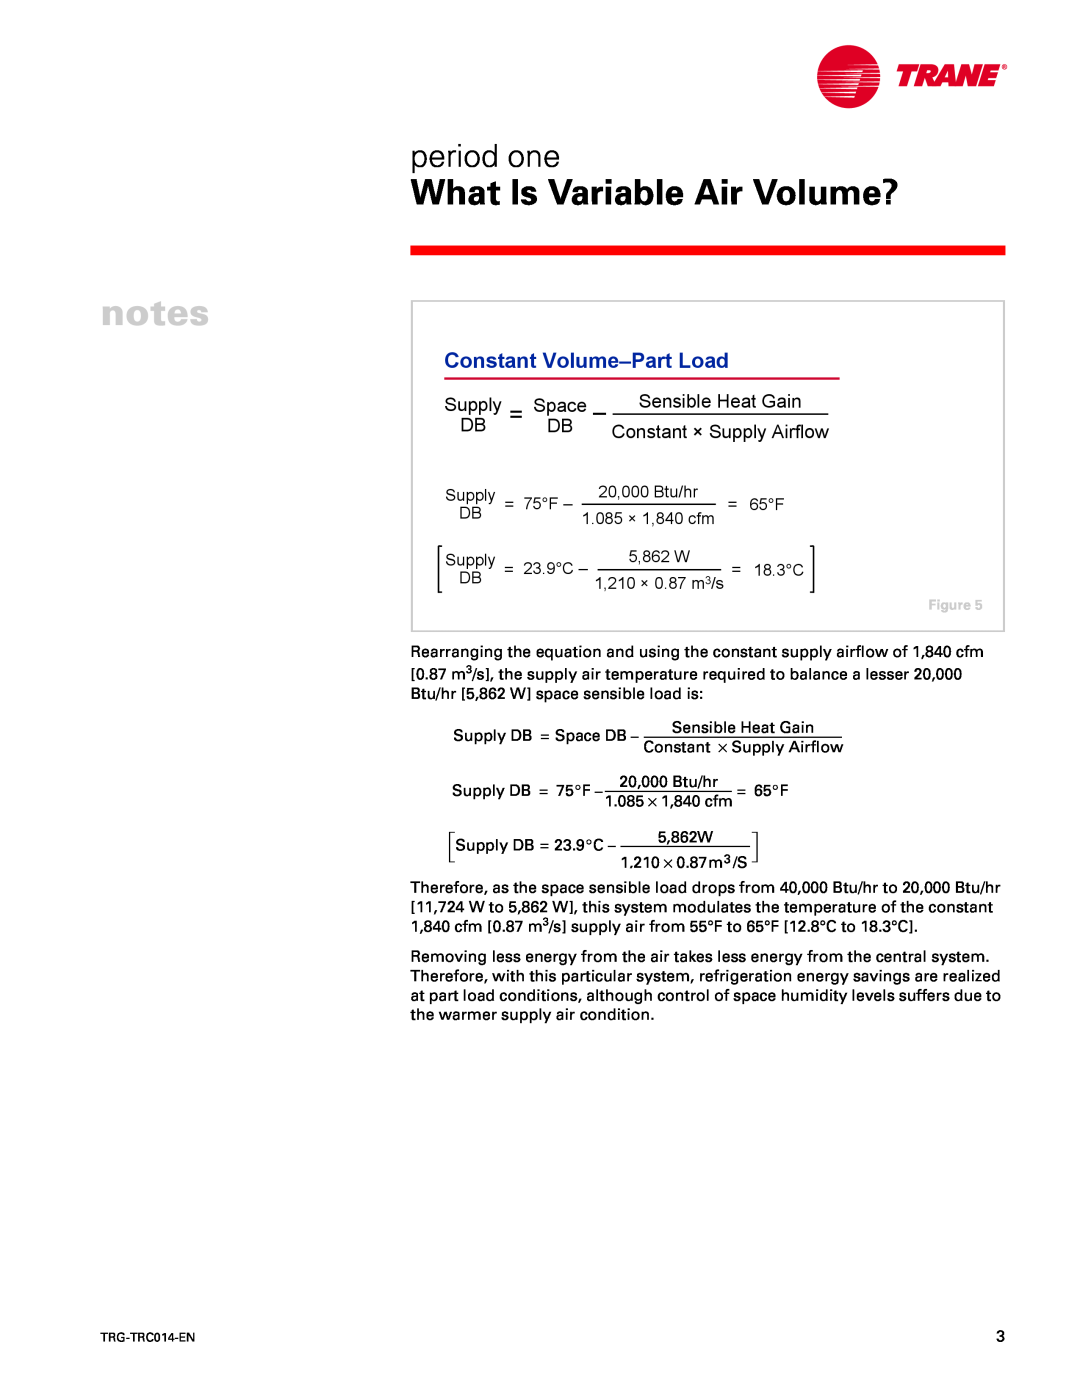 Trane TRG-TRC014-EN manual Constant Volume-PartLoad, What Is Variable Air Volume?, period one 